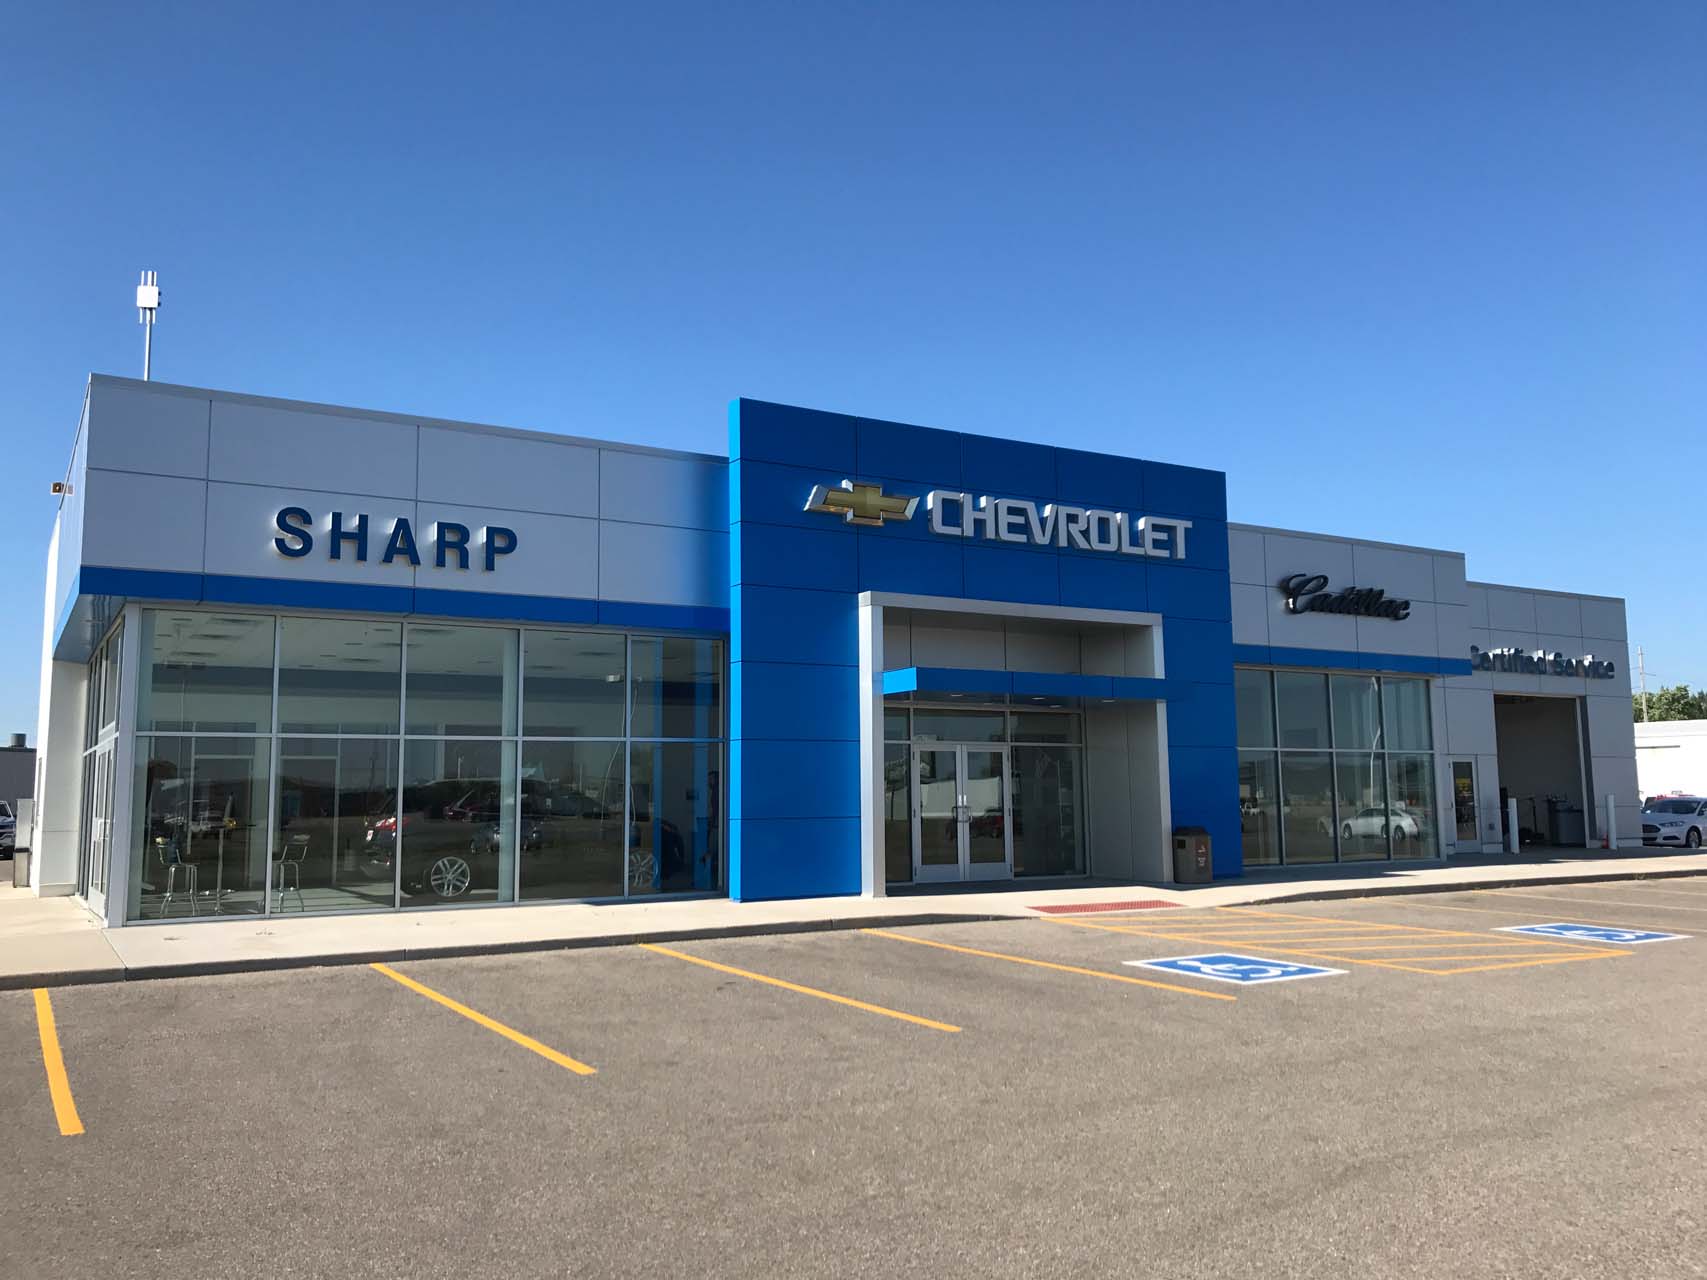 The exterior of a Chevrolet dealership